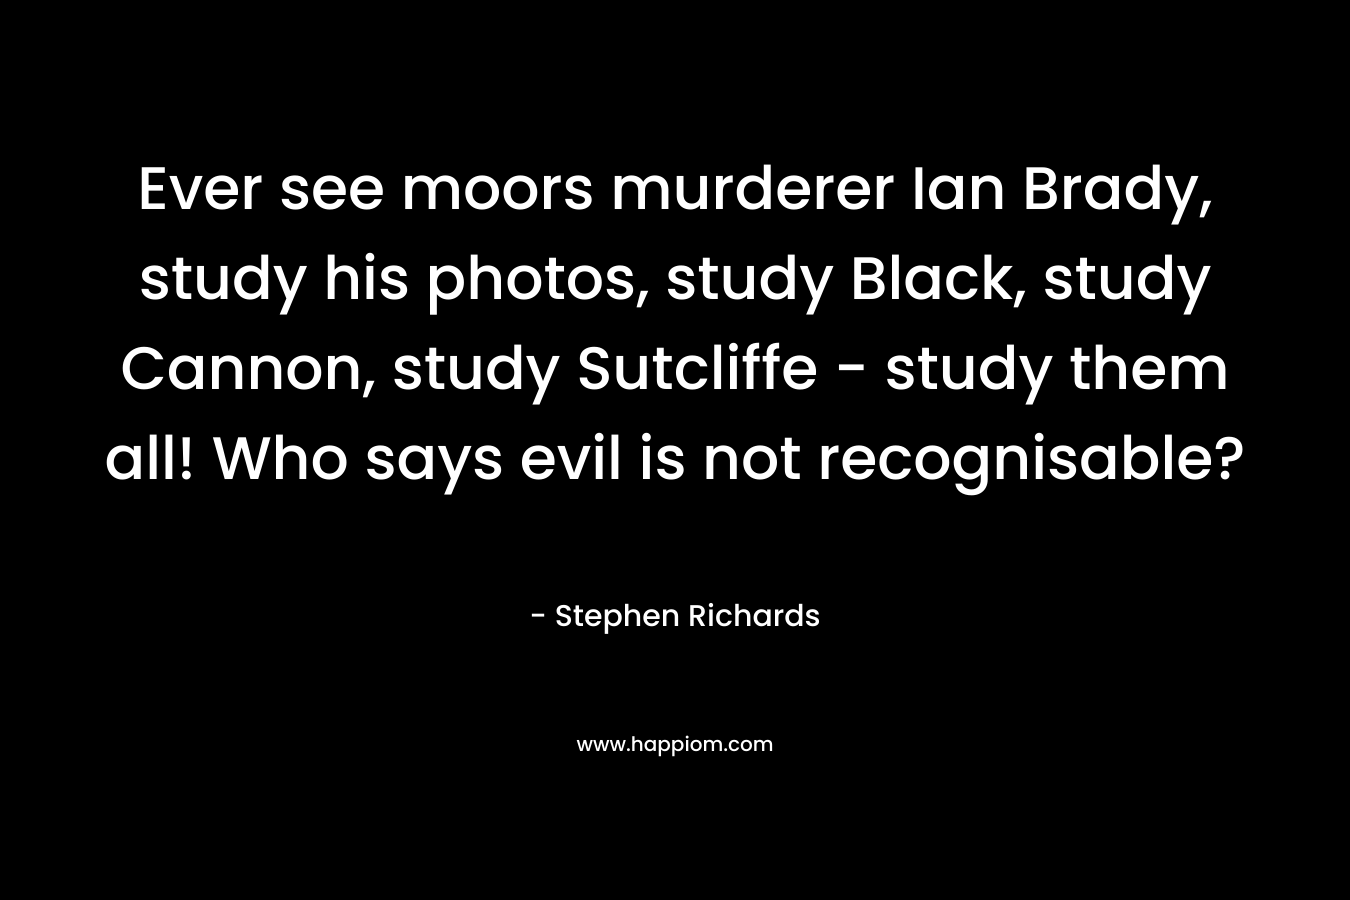 Ever see moors murderer Ian Brady, study his photos, study Black, study Cannon, study Sutcliffe – study them all! Who says evil is not recognisable? – Stephen Richards